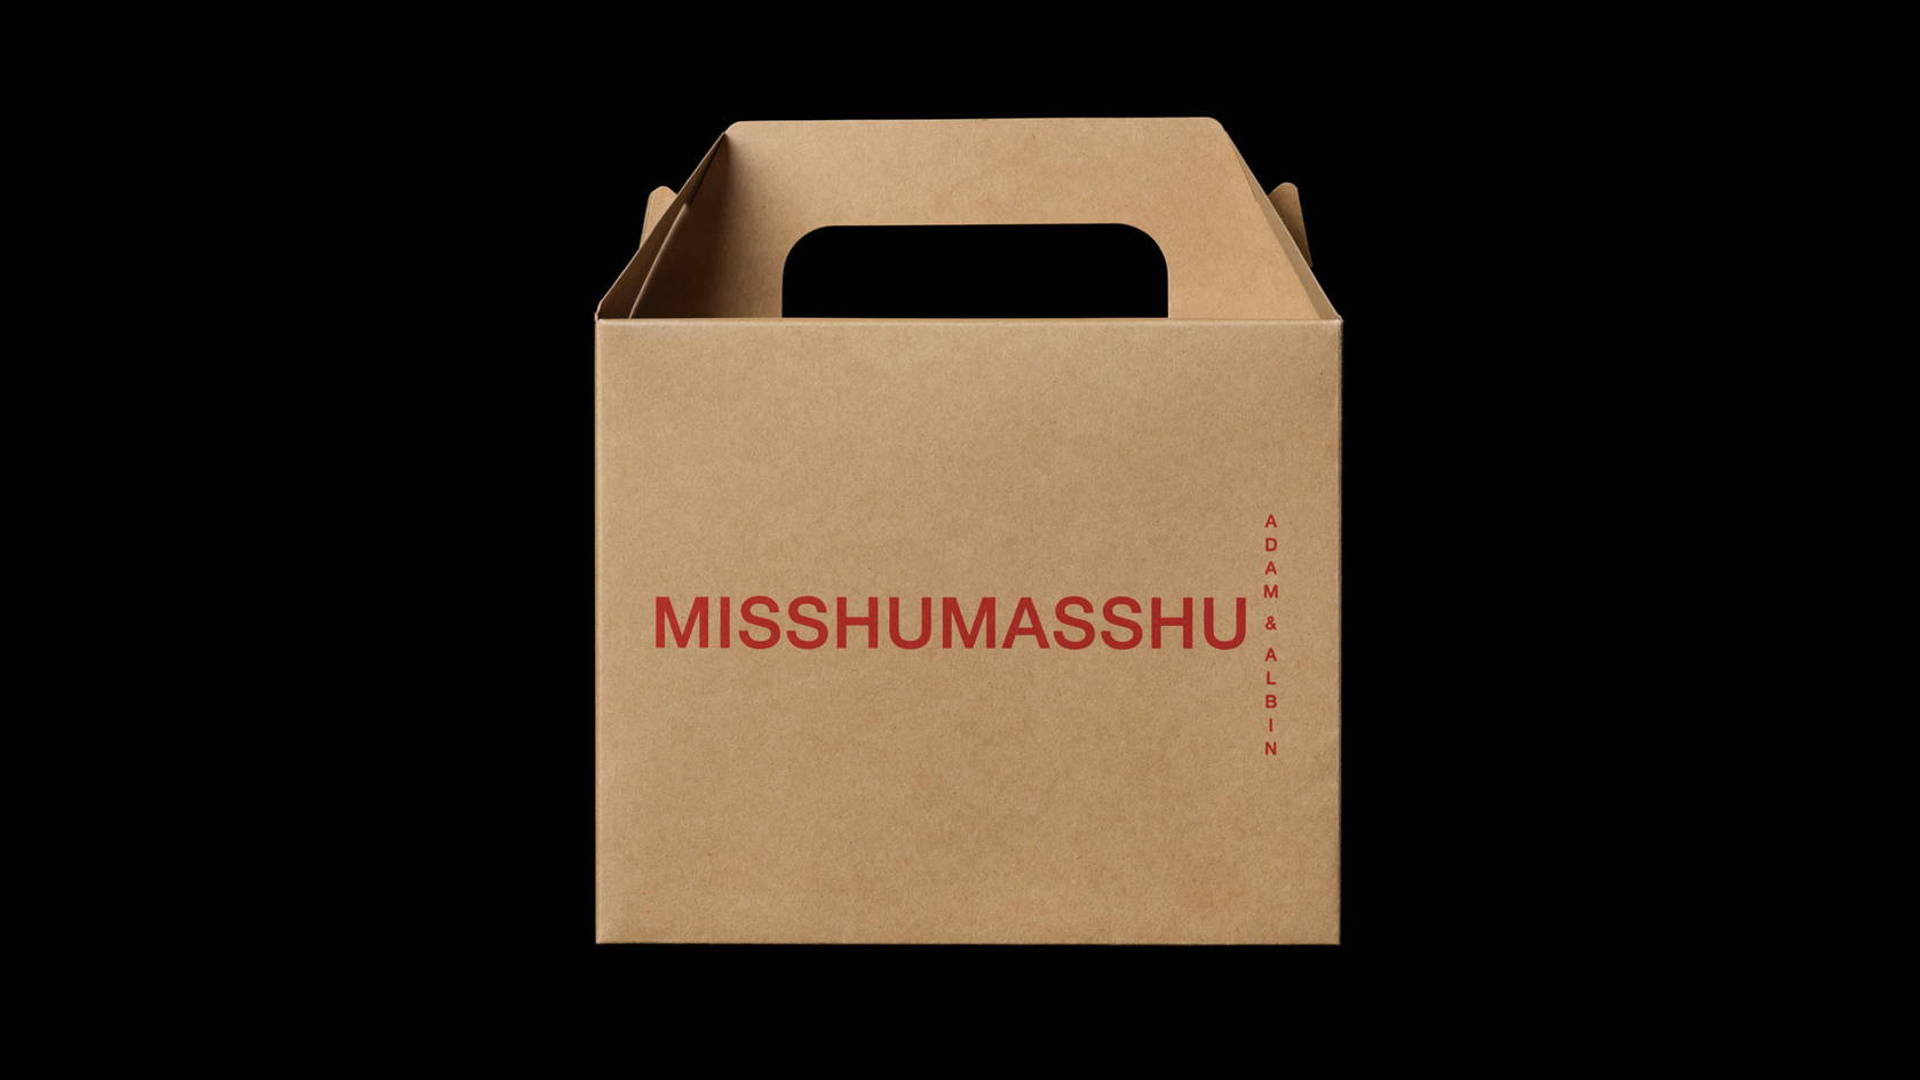 Featured image for Misshumasshu Has an international Japanese Look With Off the Shelf Packaging